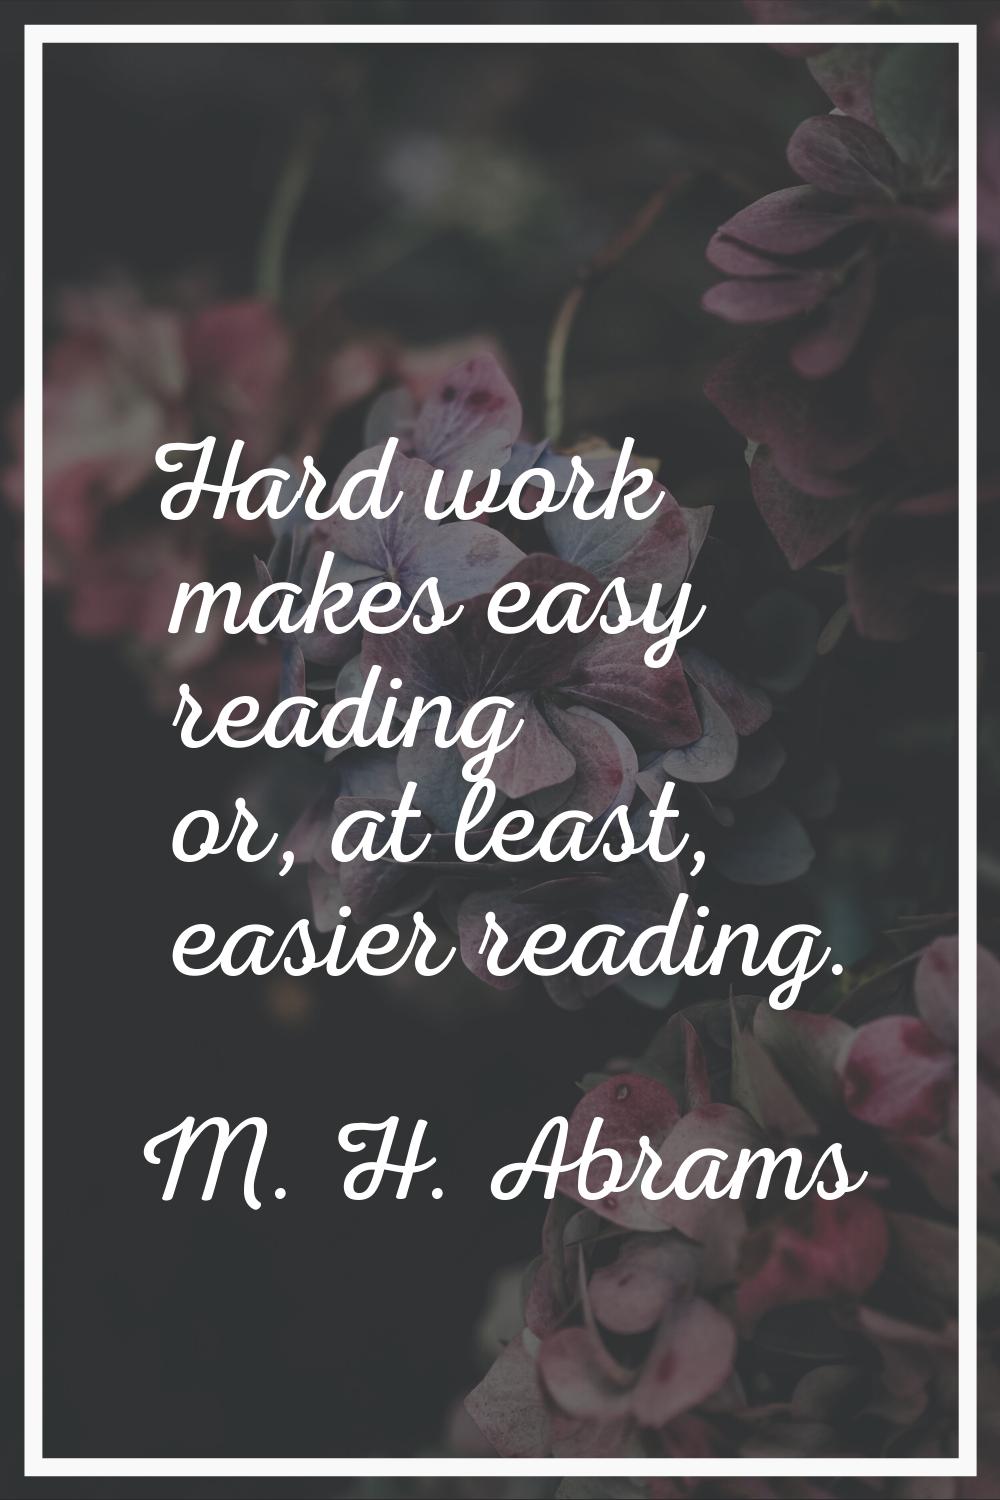 Hard work makes easy reading or, at least, easier reading.